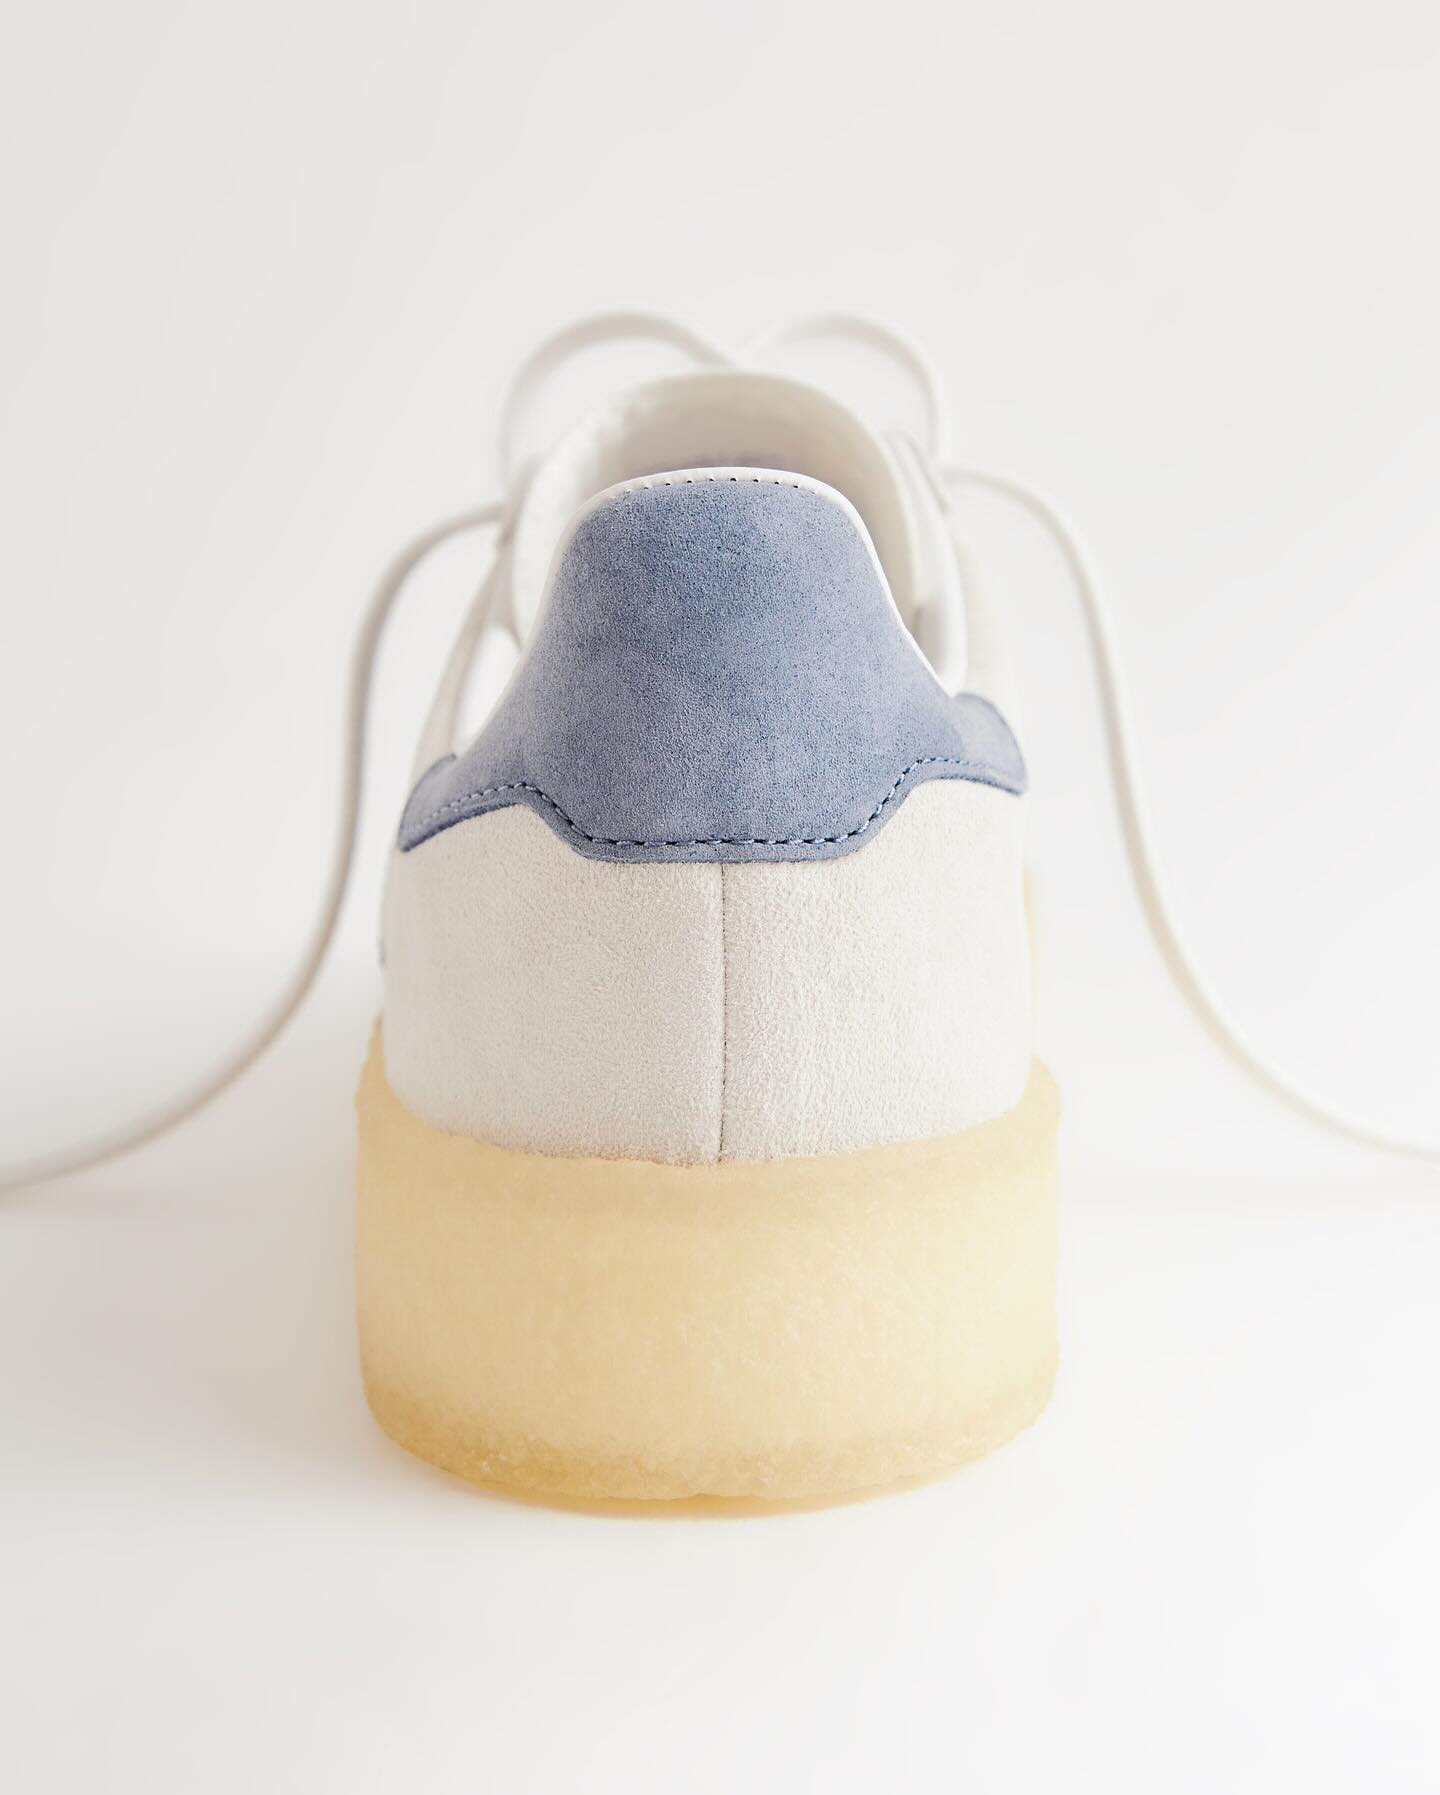 KITH's adidas x Clarks sneakers in blue and white suede